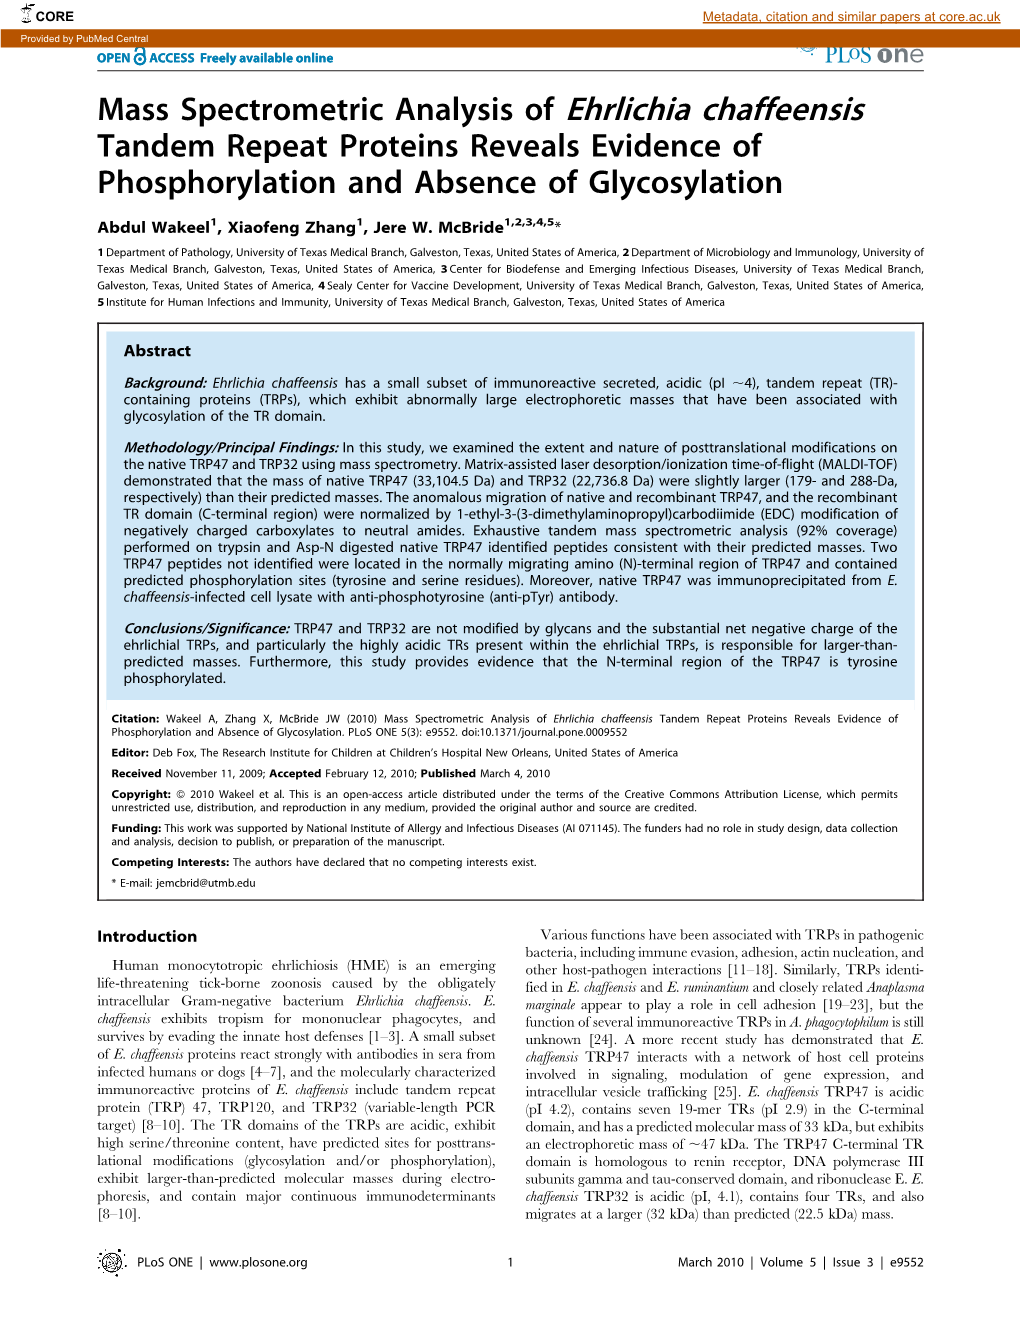 Mass Spectrometric Analysis of Ehrlichia Chaffeensis Tandem Repeat Proteins Reveals Evidence of Phosphorylation and Absence of Glycosylation